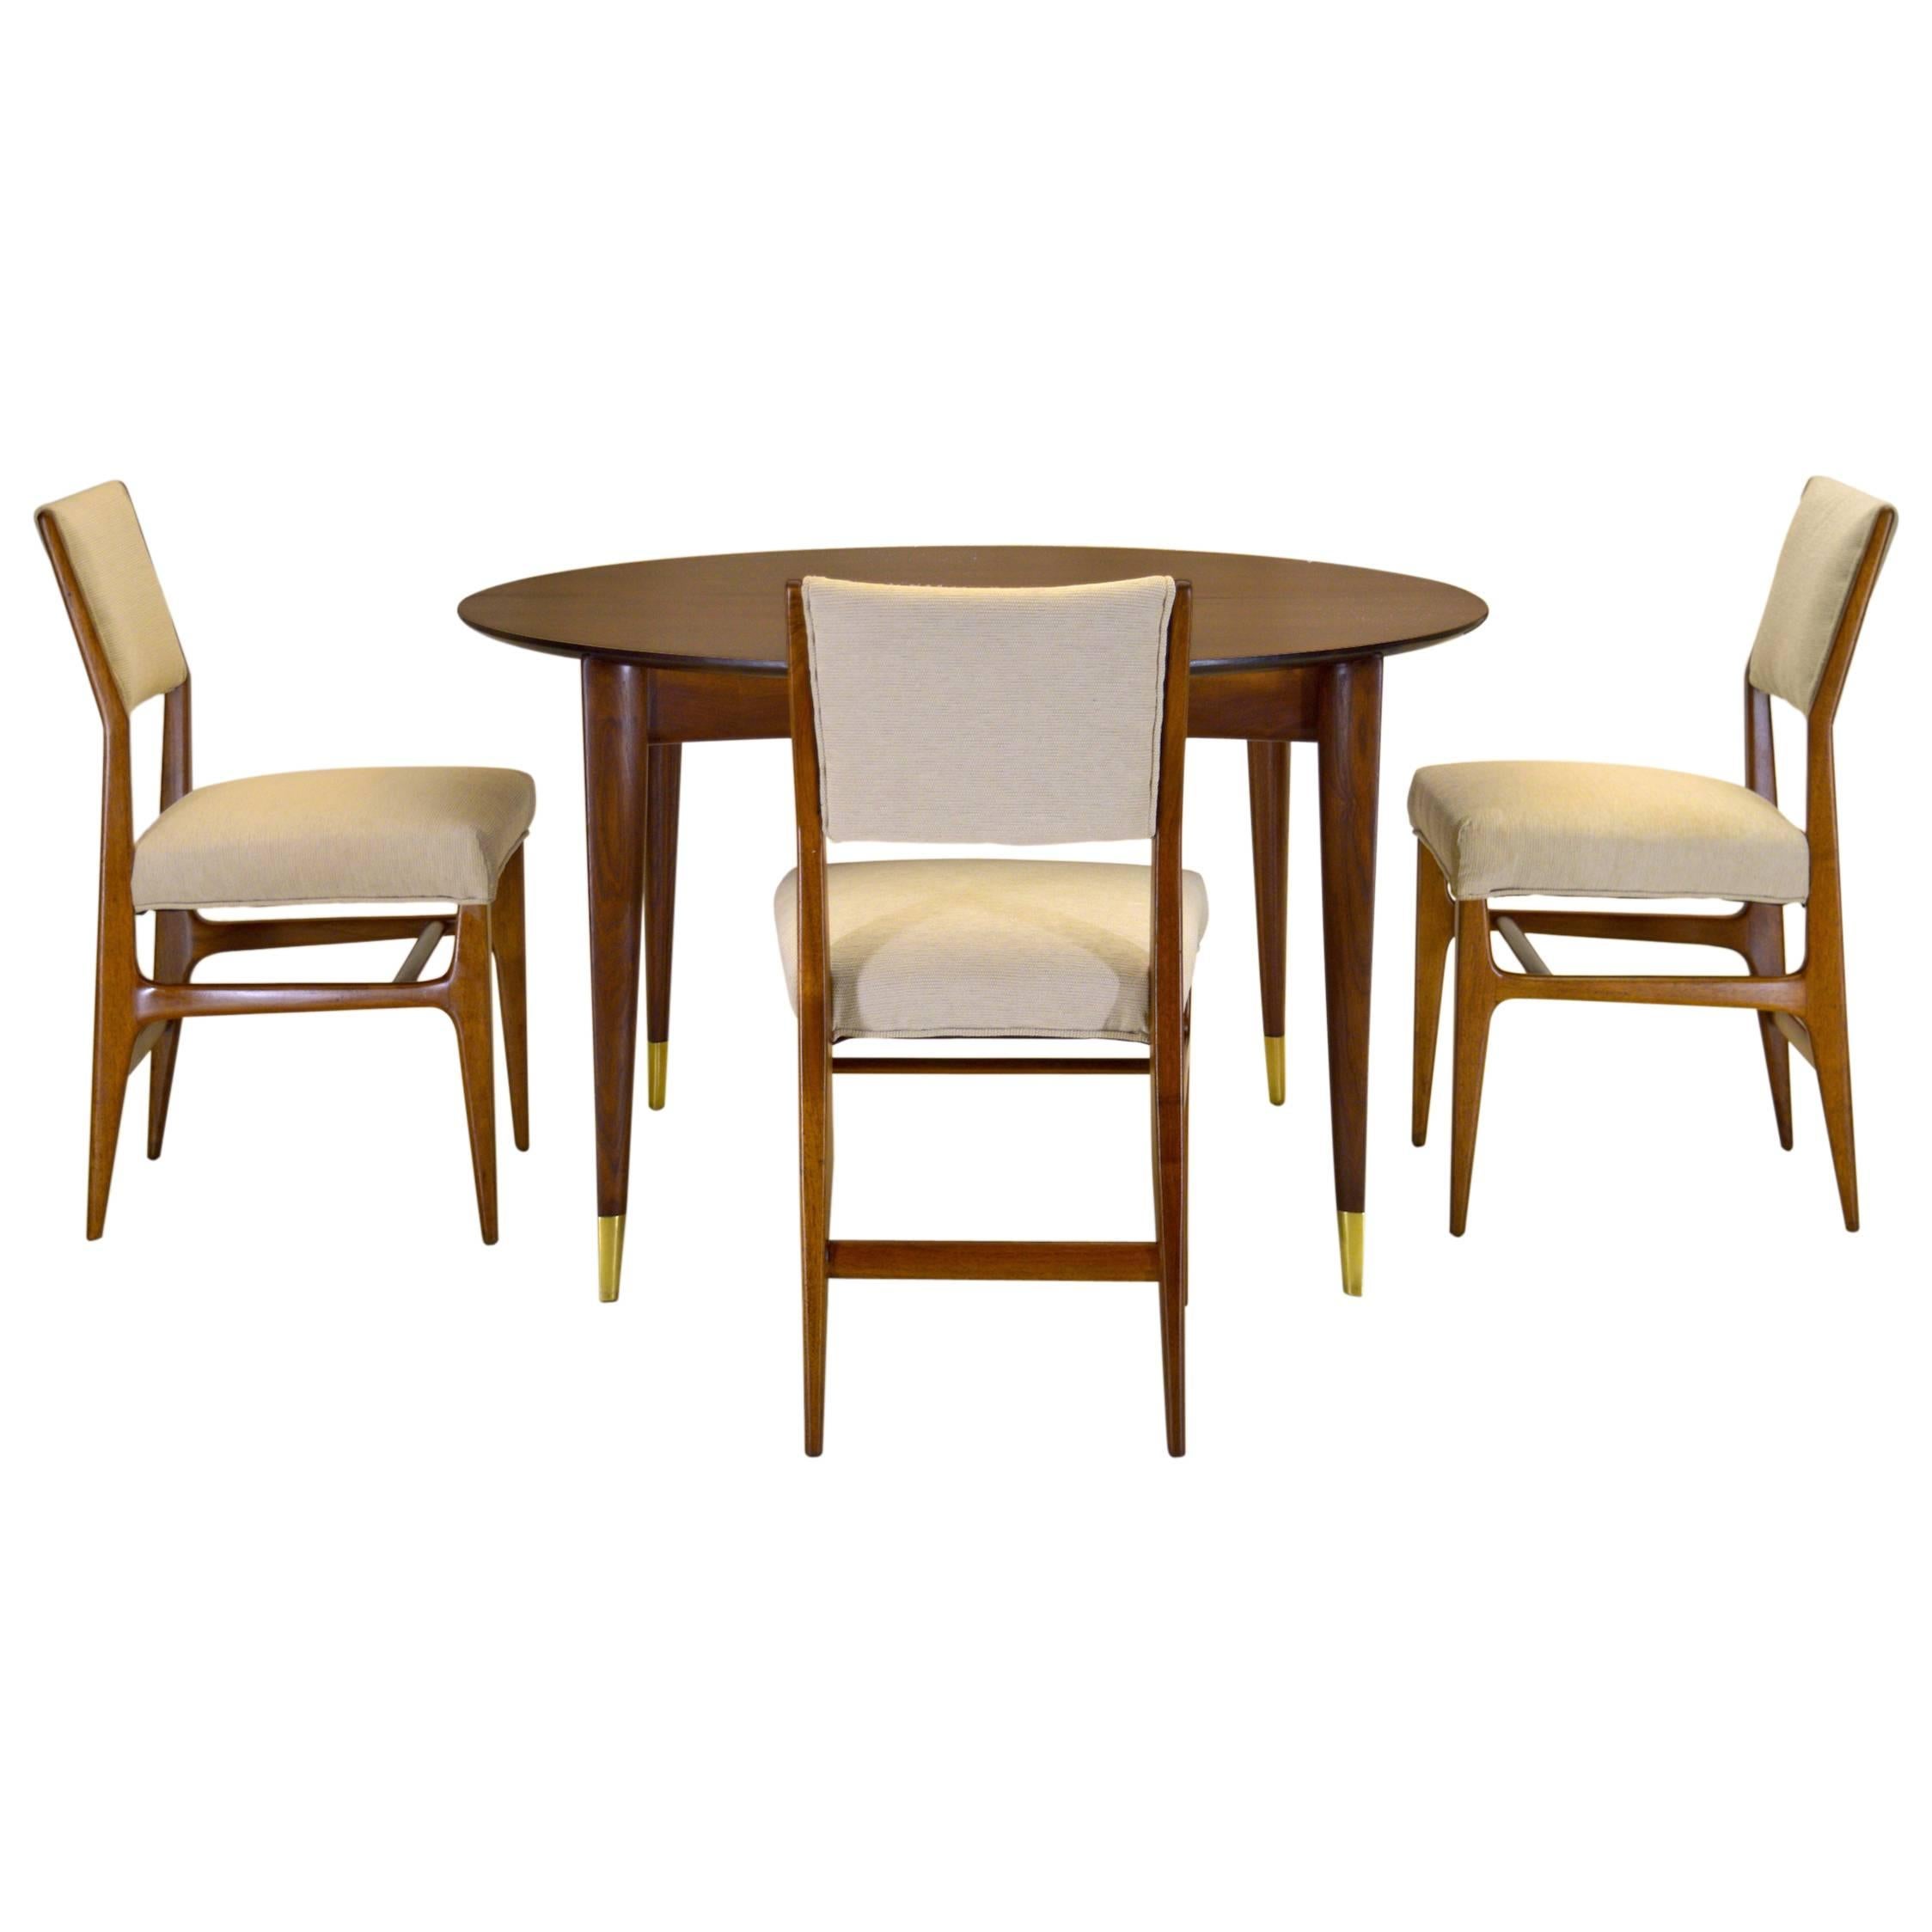 Gio Ponti Dining Table and Four Chairs, 1951